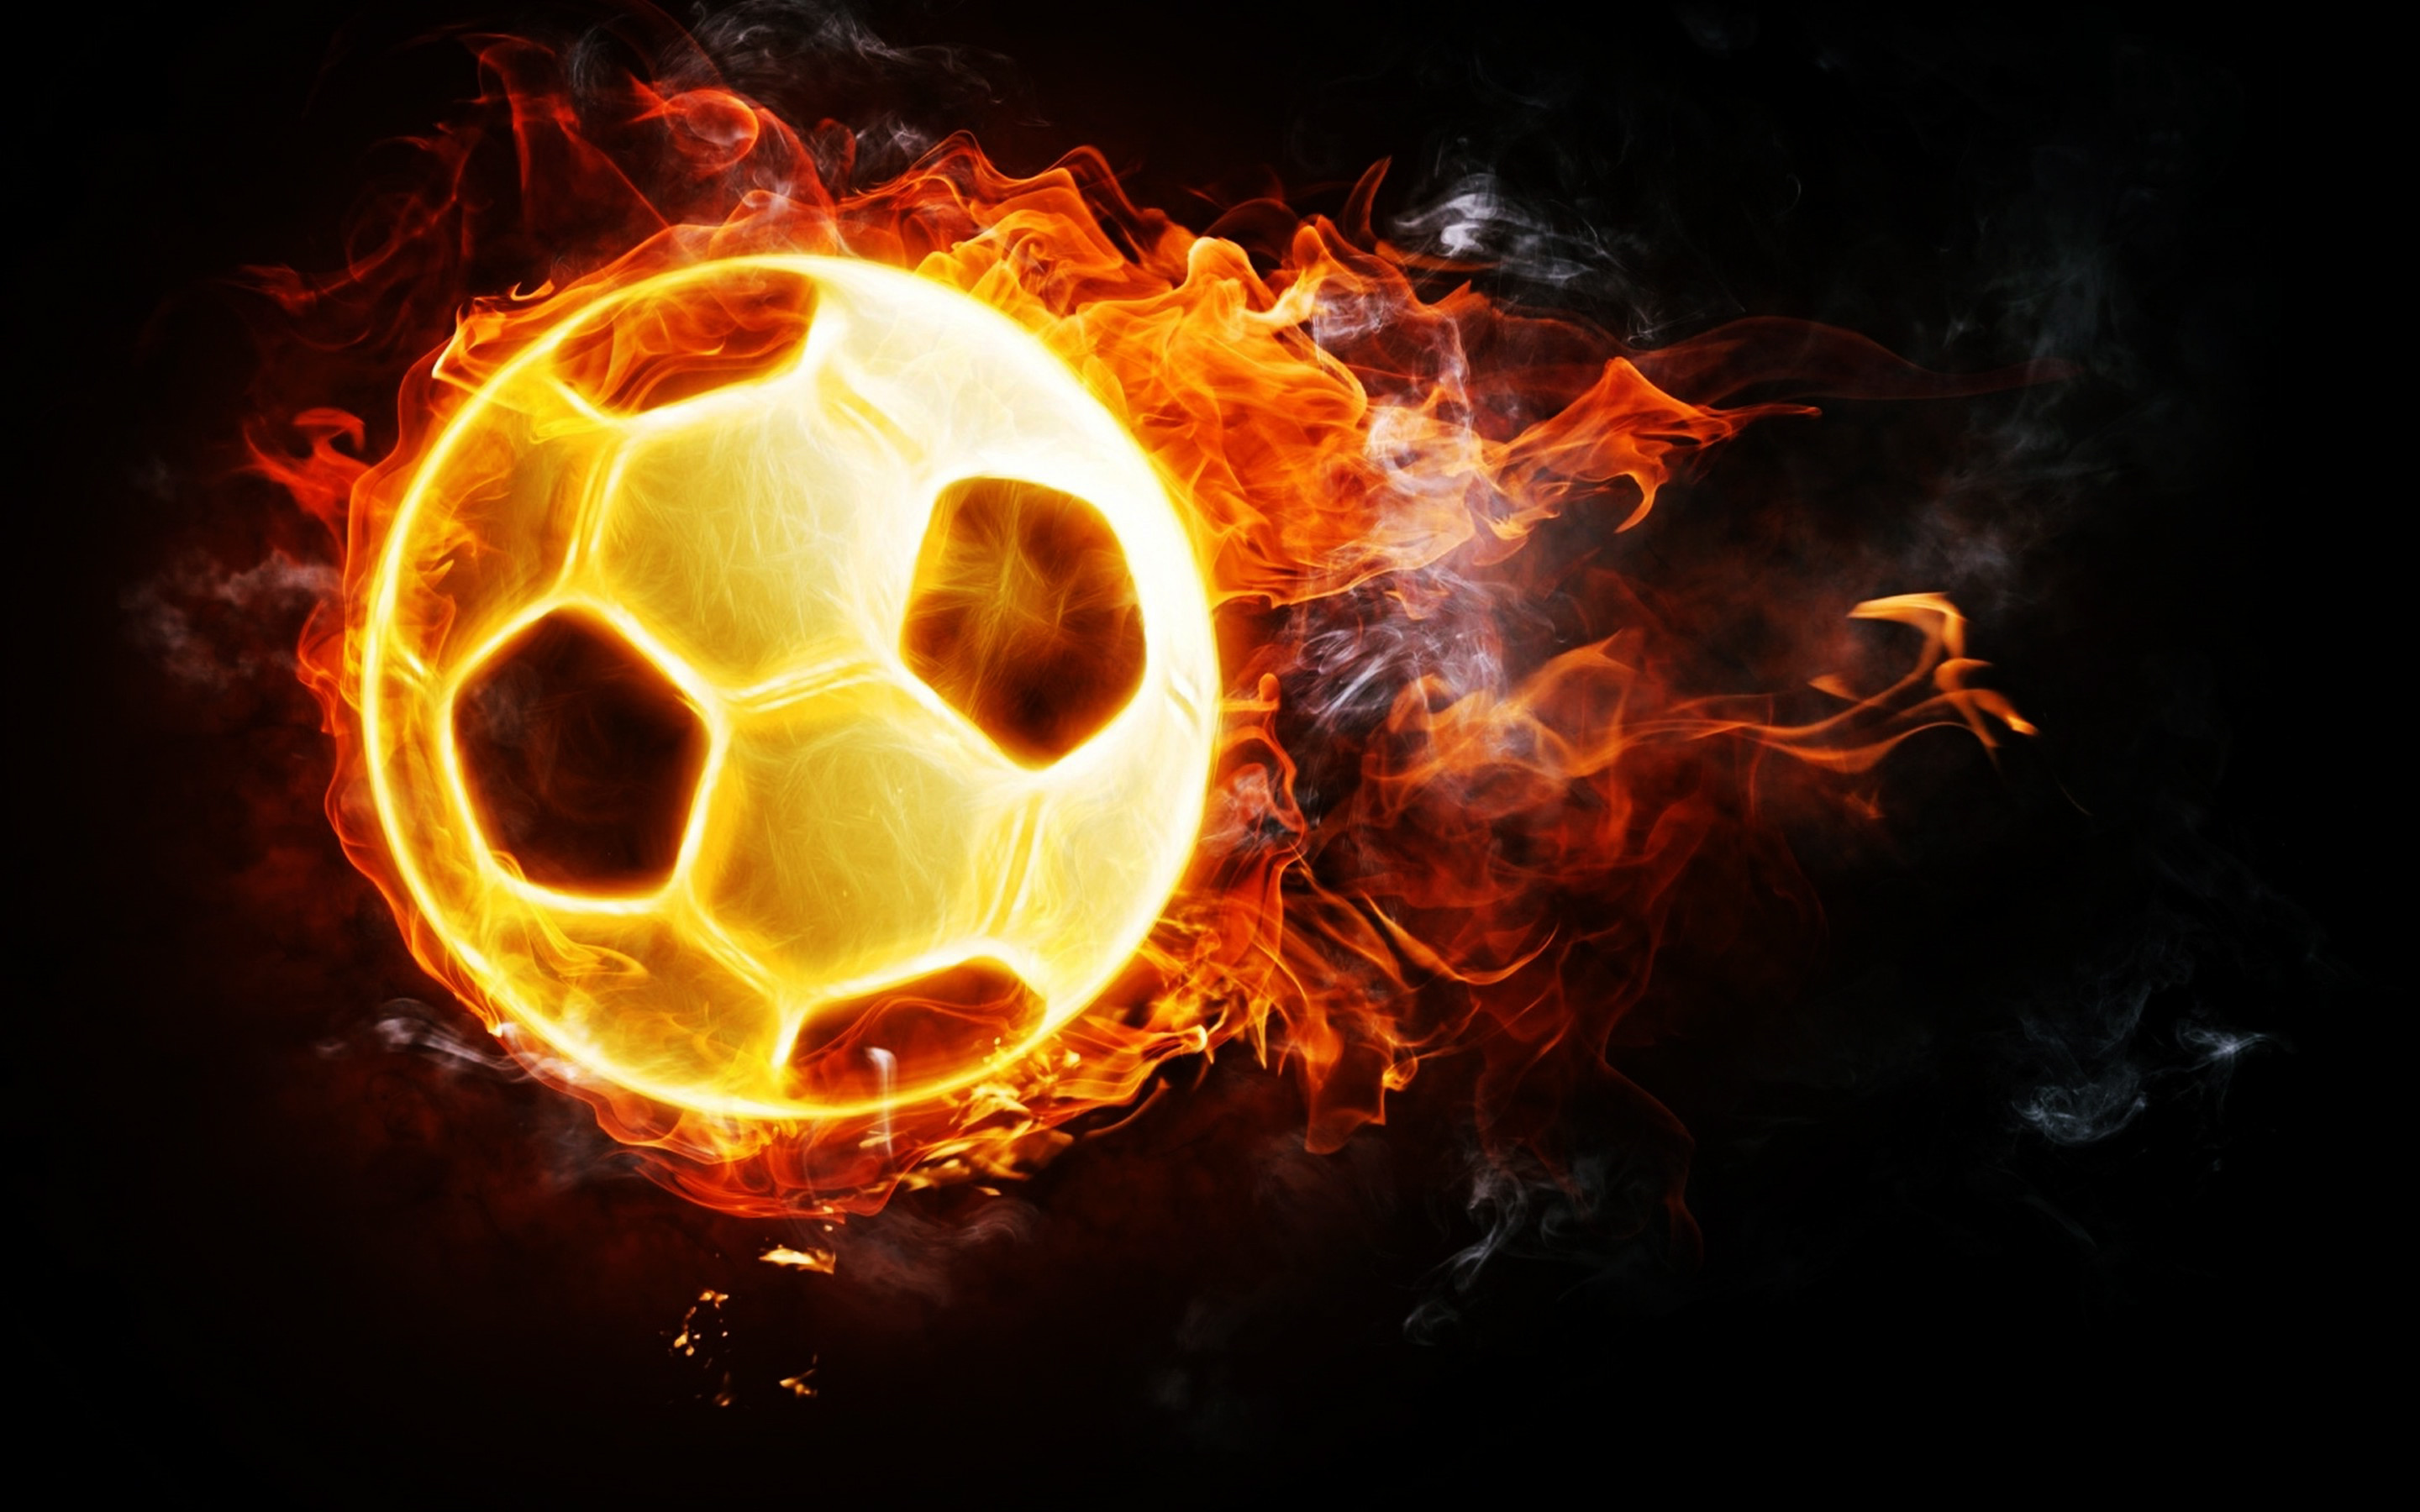 440 Soccer Spain Football Three Dimensional Shape Stock Photos Pictures   RoyaltyFree Images  iStock